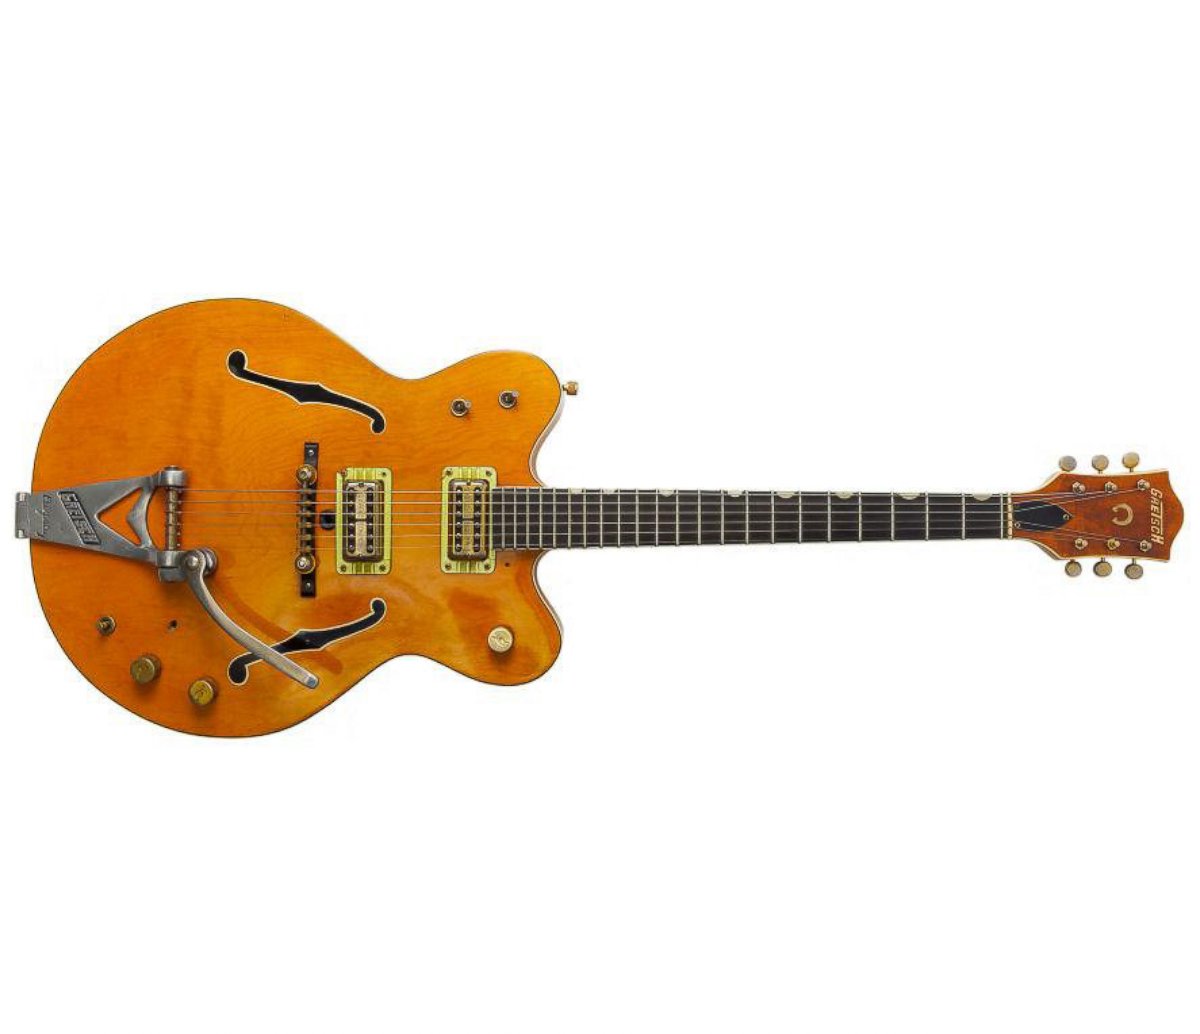 PHOTO: John Lennon's 1963 Gretsch 6120 is estimated to sell at auction for as much as $942,000 on Nov. 23, 2014.